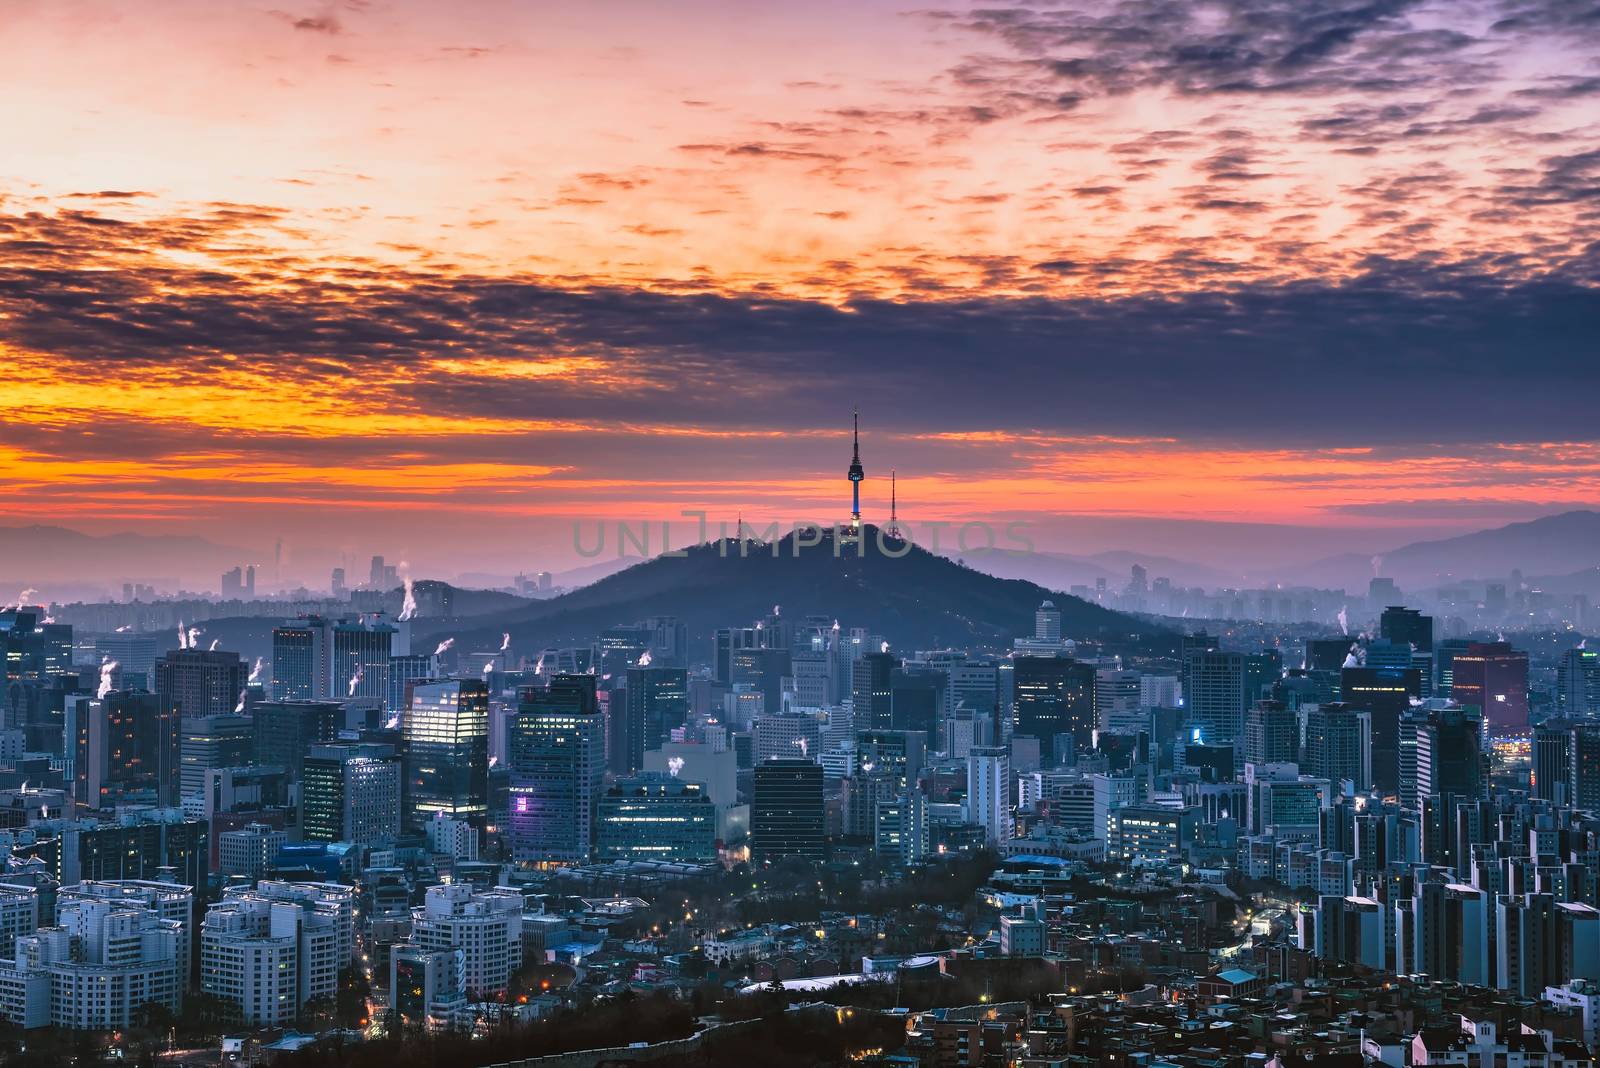 View of downtown cityscape and Seoul tower in Seoul, South Korea by wijitamkapet@gmail.com